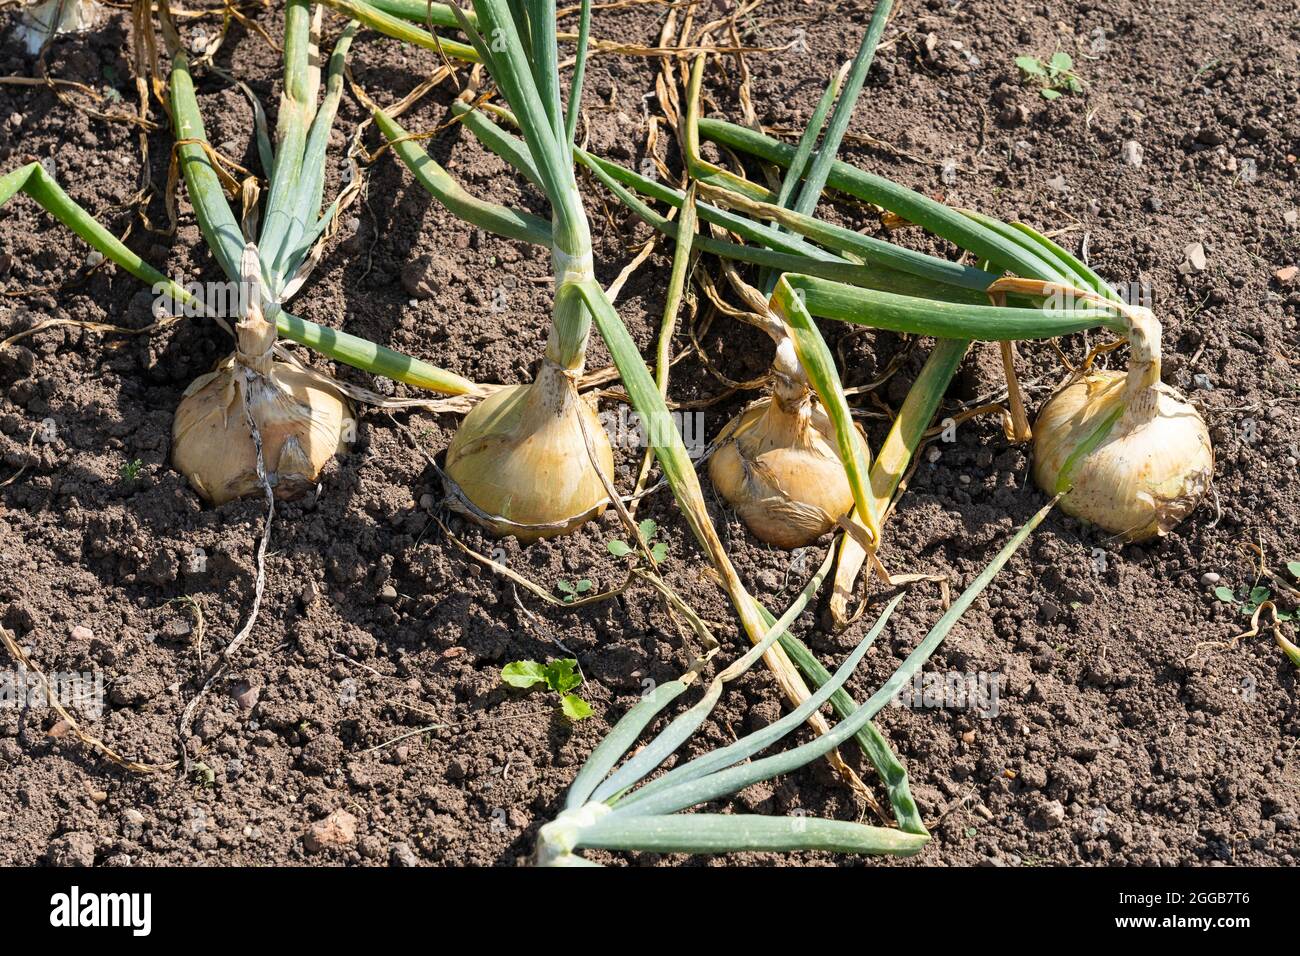 The onion (Allium cepa L., from Latin cepa 'onion'), also known as the bulb onion or common onion, growing in a vegetable garden, UK Stock Photo